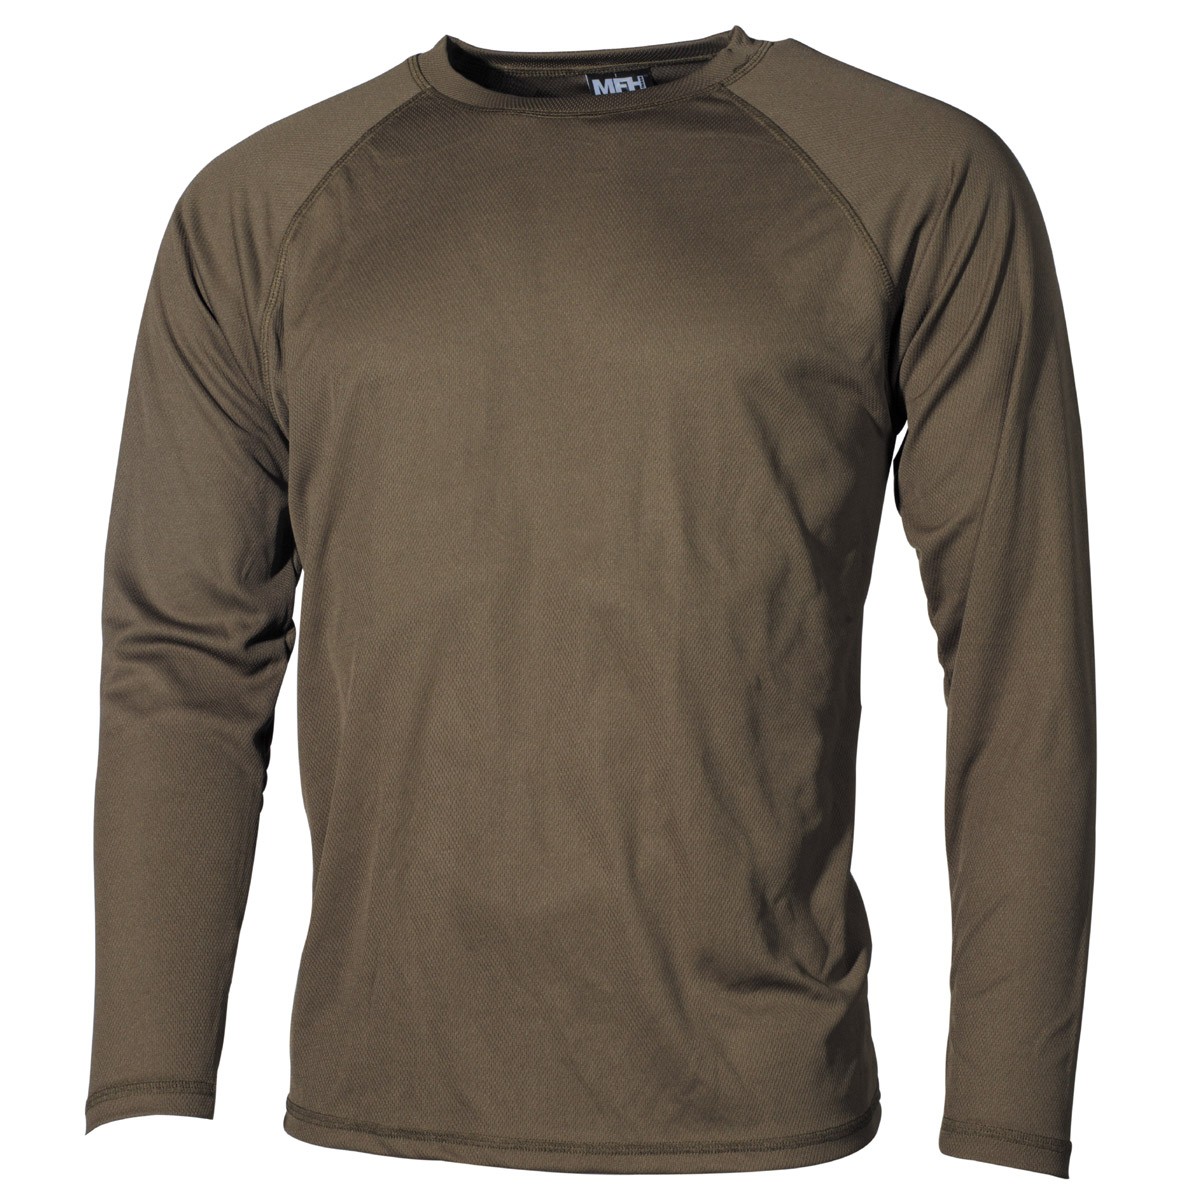 Military/Outdoor Undershirt Level 1 Gen.3 Lightweight and Quick Drying - Green